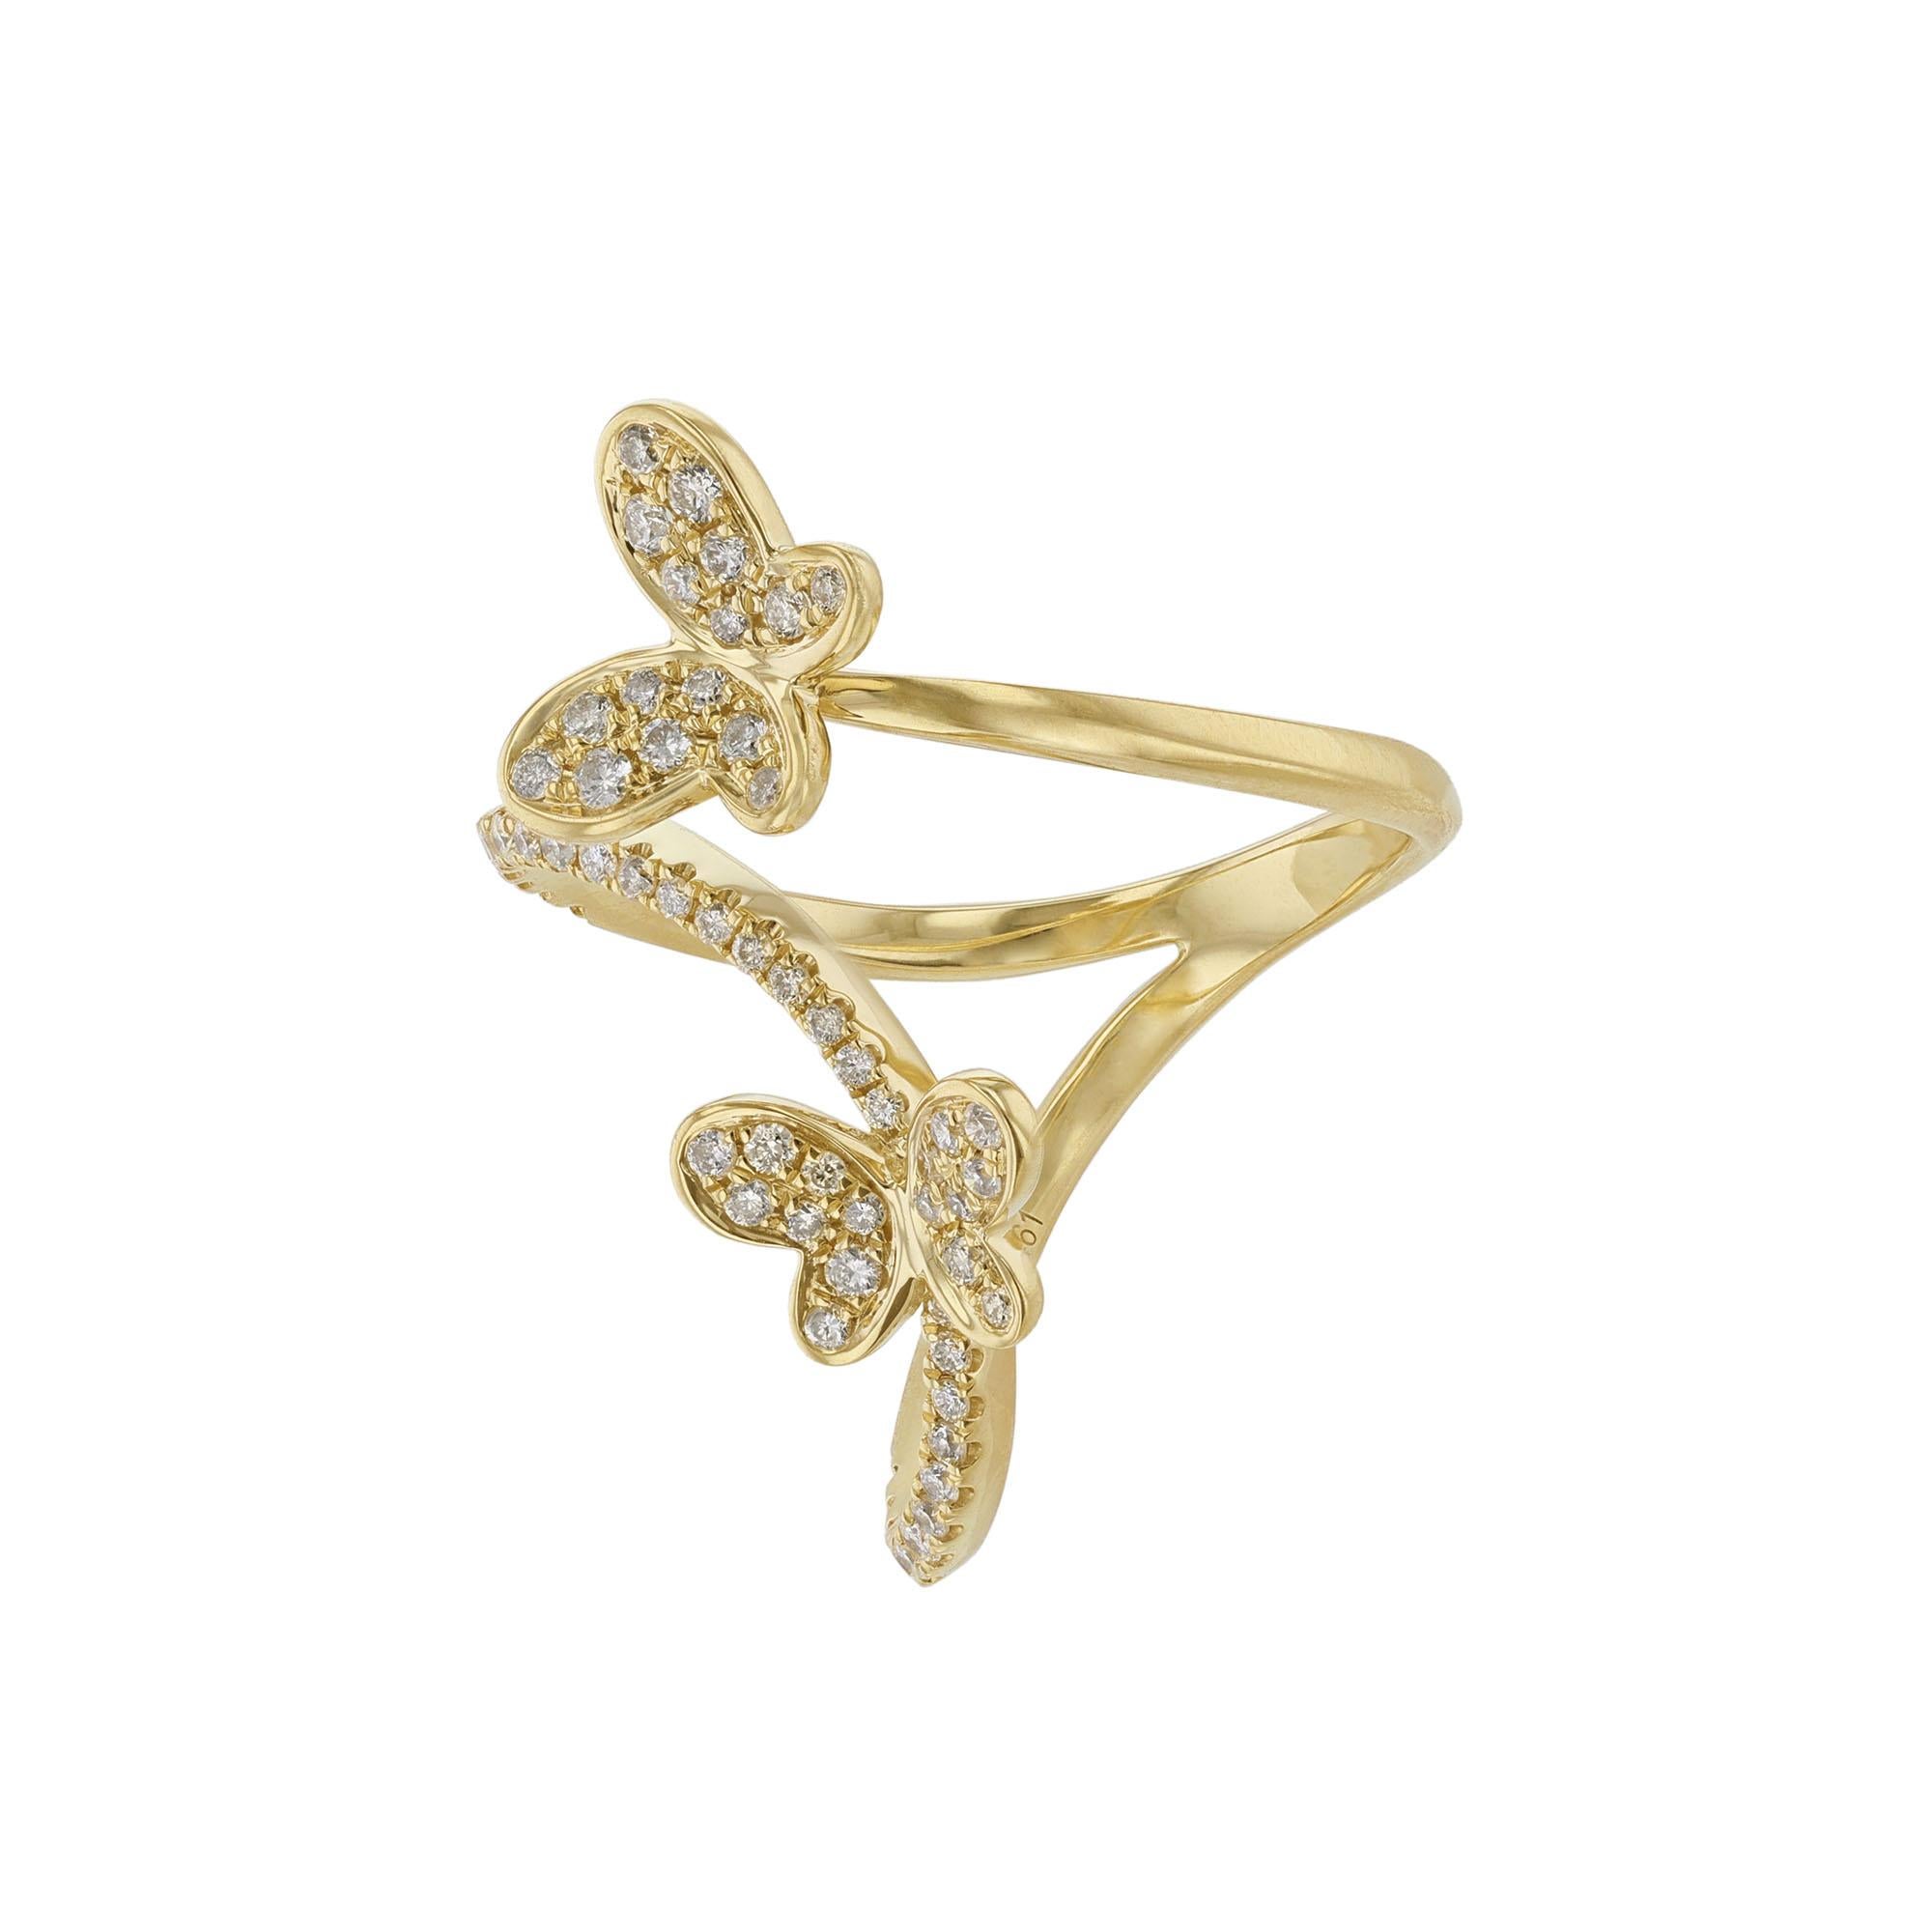 This double butterfly wrap-around ring is made in 18 Karat Yellow Gold featuring 61 round cut, pave' set diamonds weighing 0.46 carats.  With a color grade (H) and clarity grade (SI2).